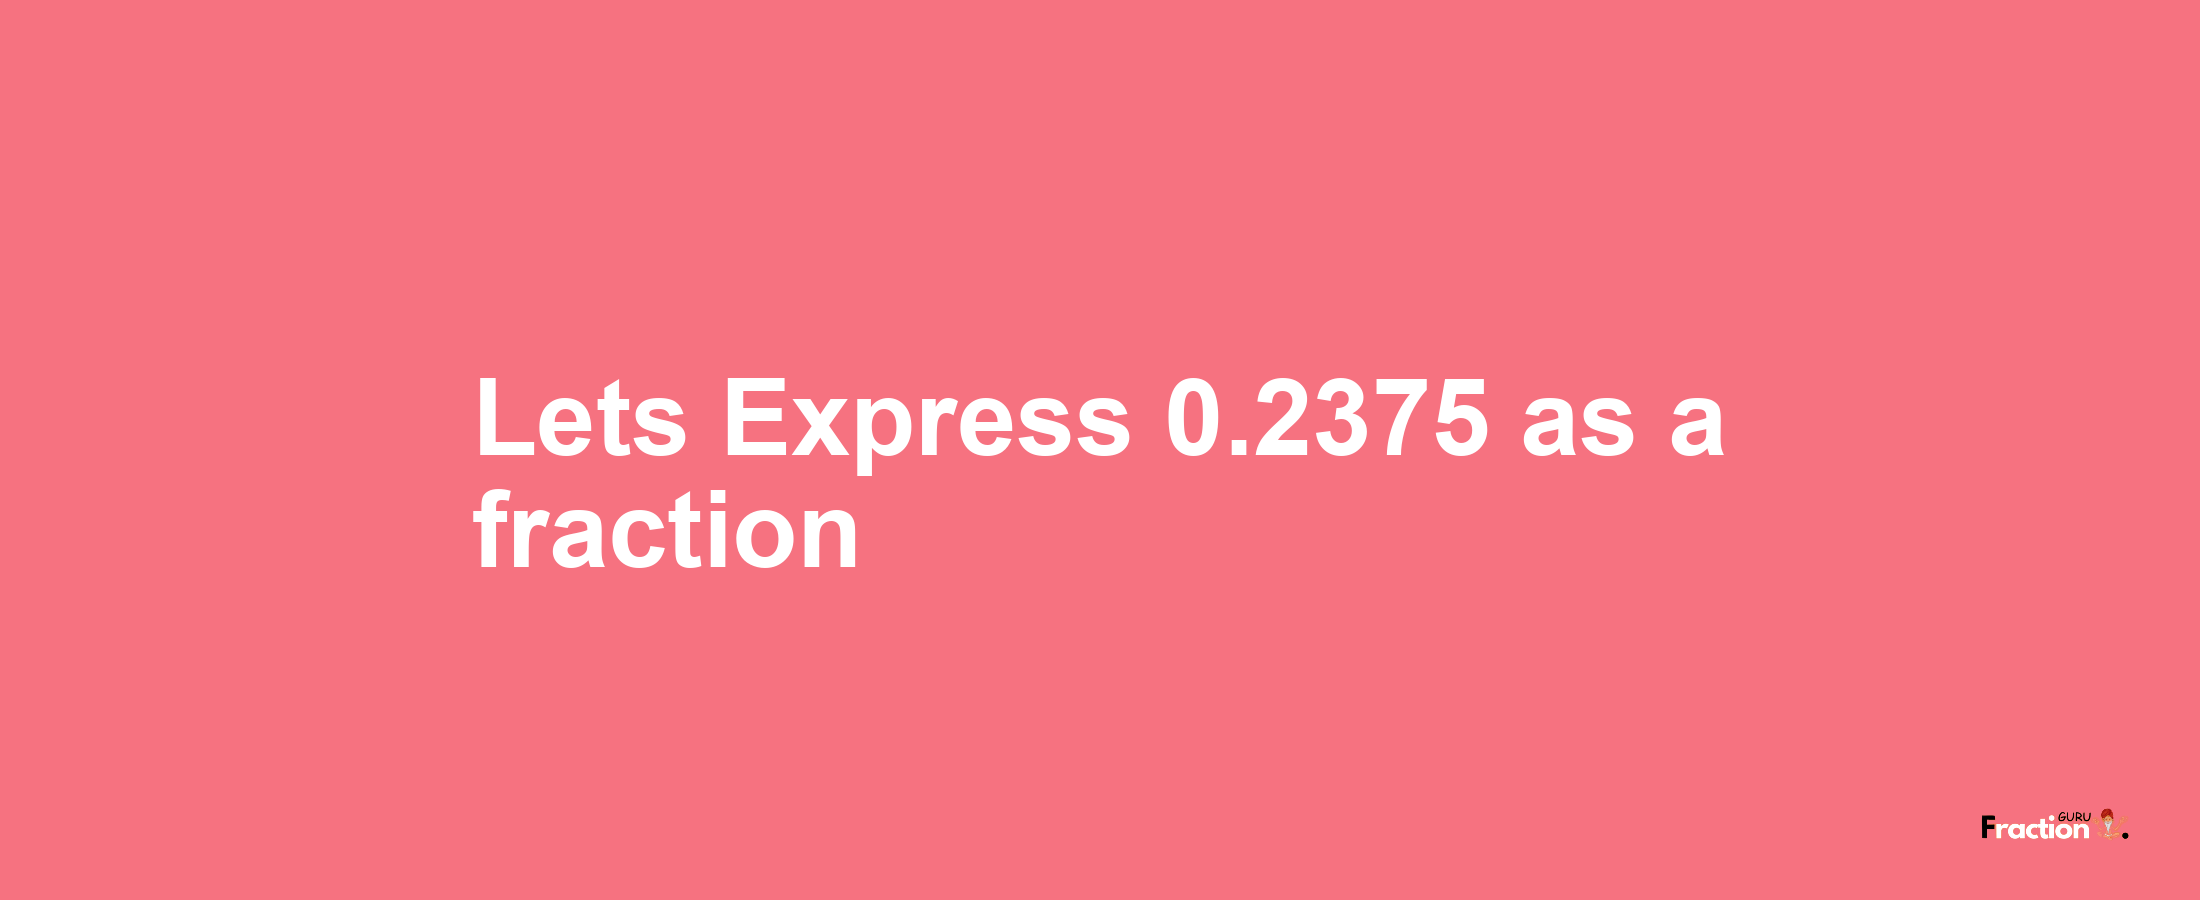 Lets Express 0.2375 as afraction